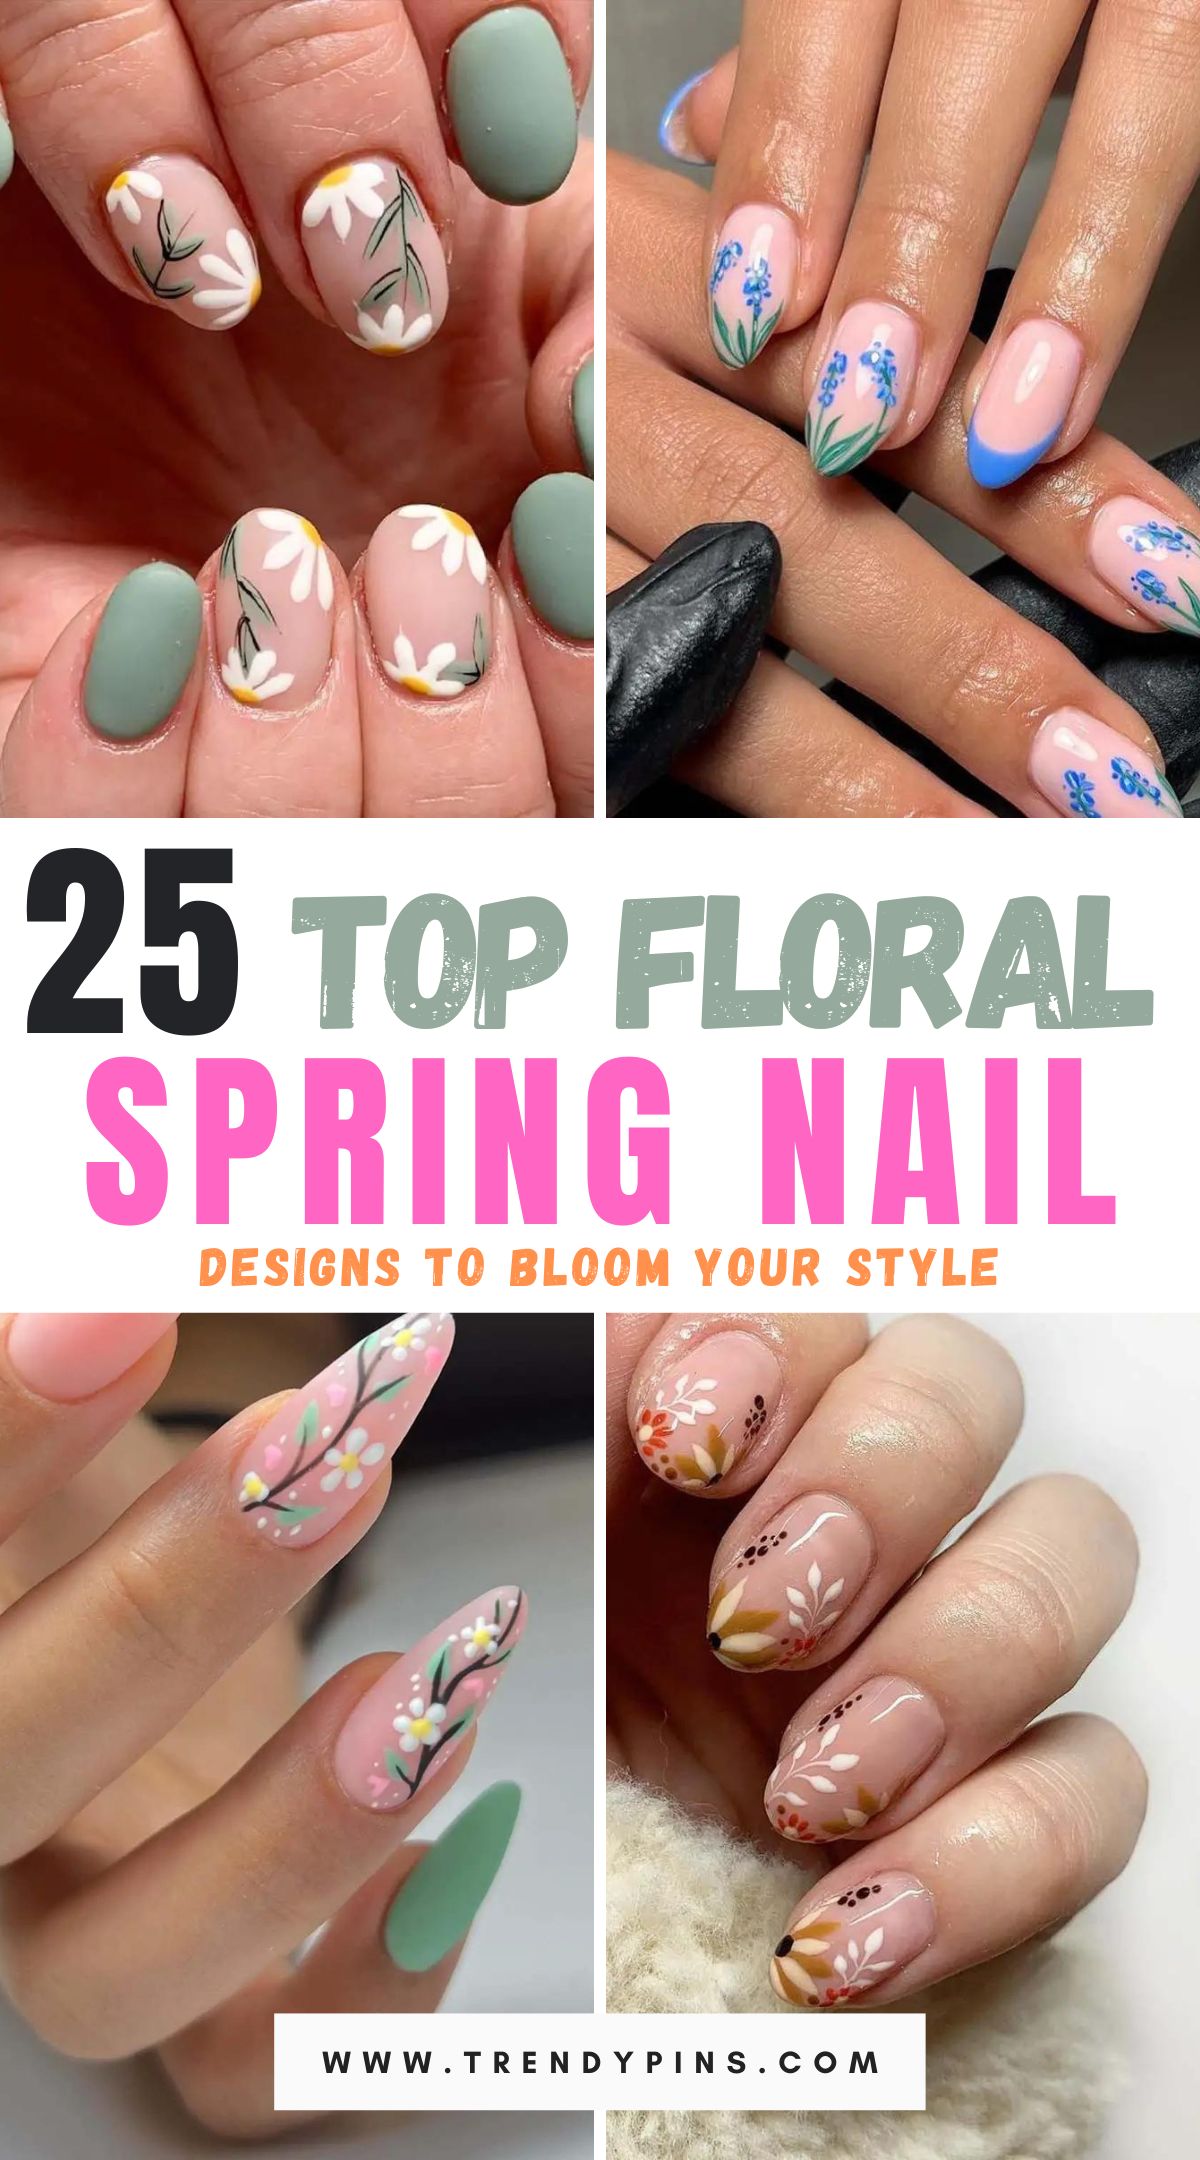 Blossom your look with 25 fresh and floral spring nail designs. Embrace the beauty of the season with these delightful and inspiring nail art ideas that will add a touch of spring to your style.